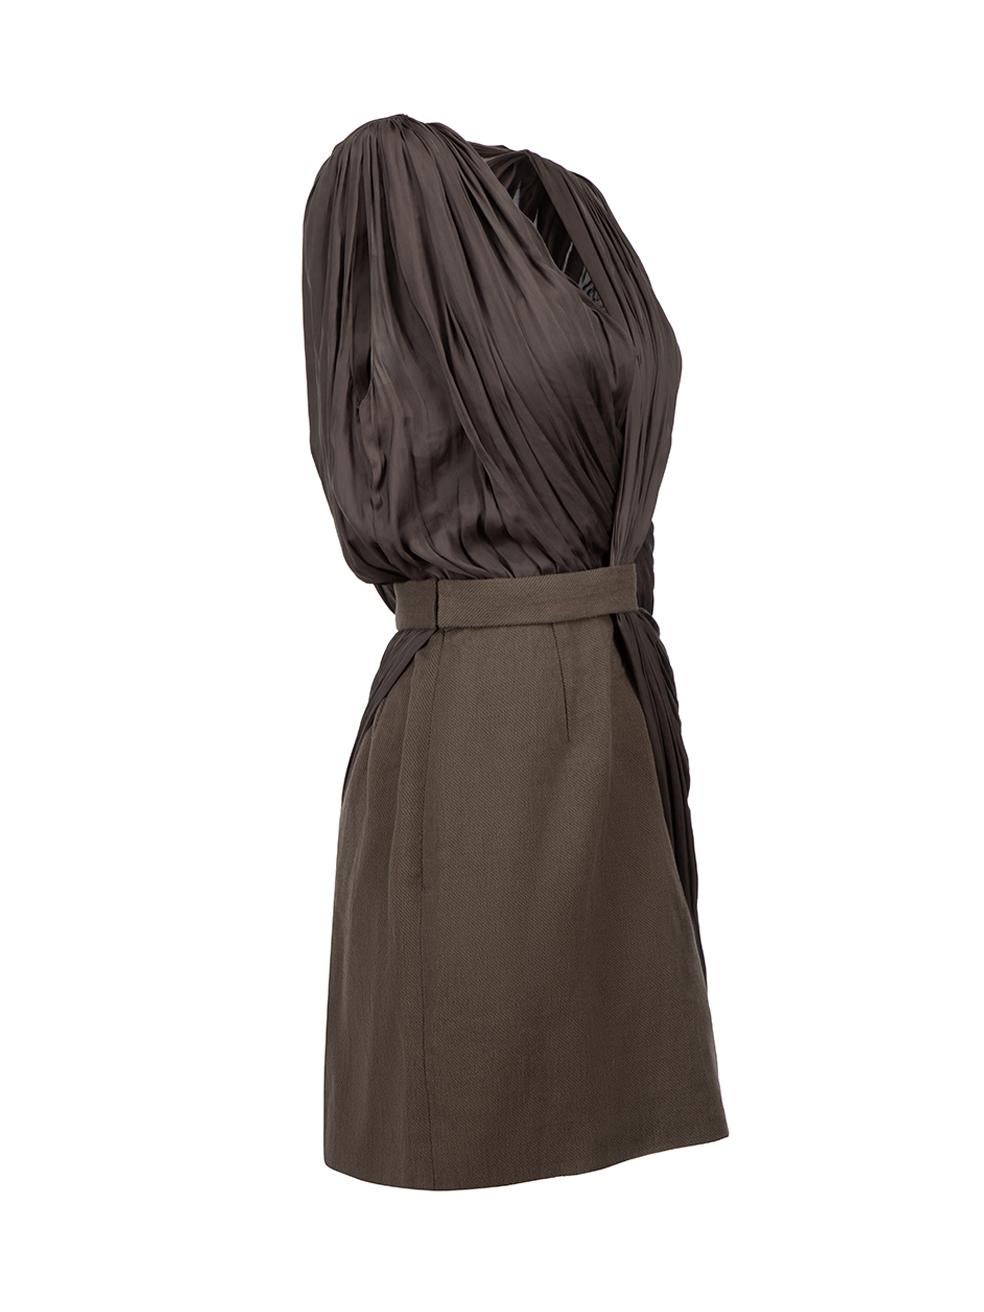 CONDITION is Very good. Hardly any visible wear to dress is evident on this used Alexander Wang designer resale item.

Details
Brown
Linen
Mini dress
Asymmetric and draped accent
V neckline
Side zip closure with hook and eye

Made in